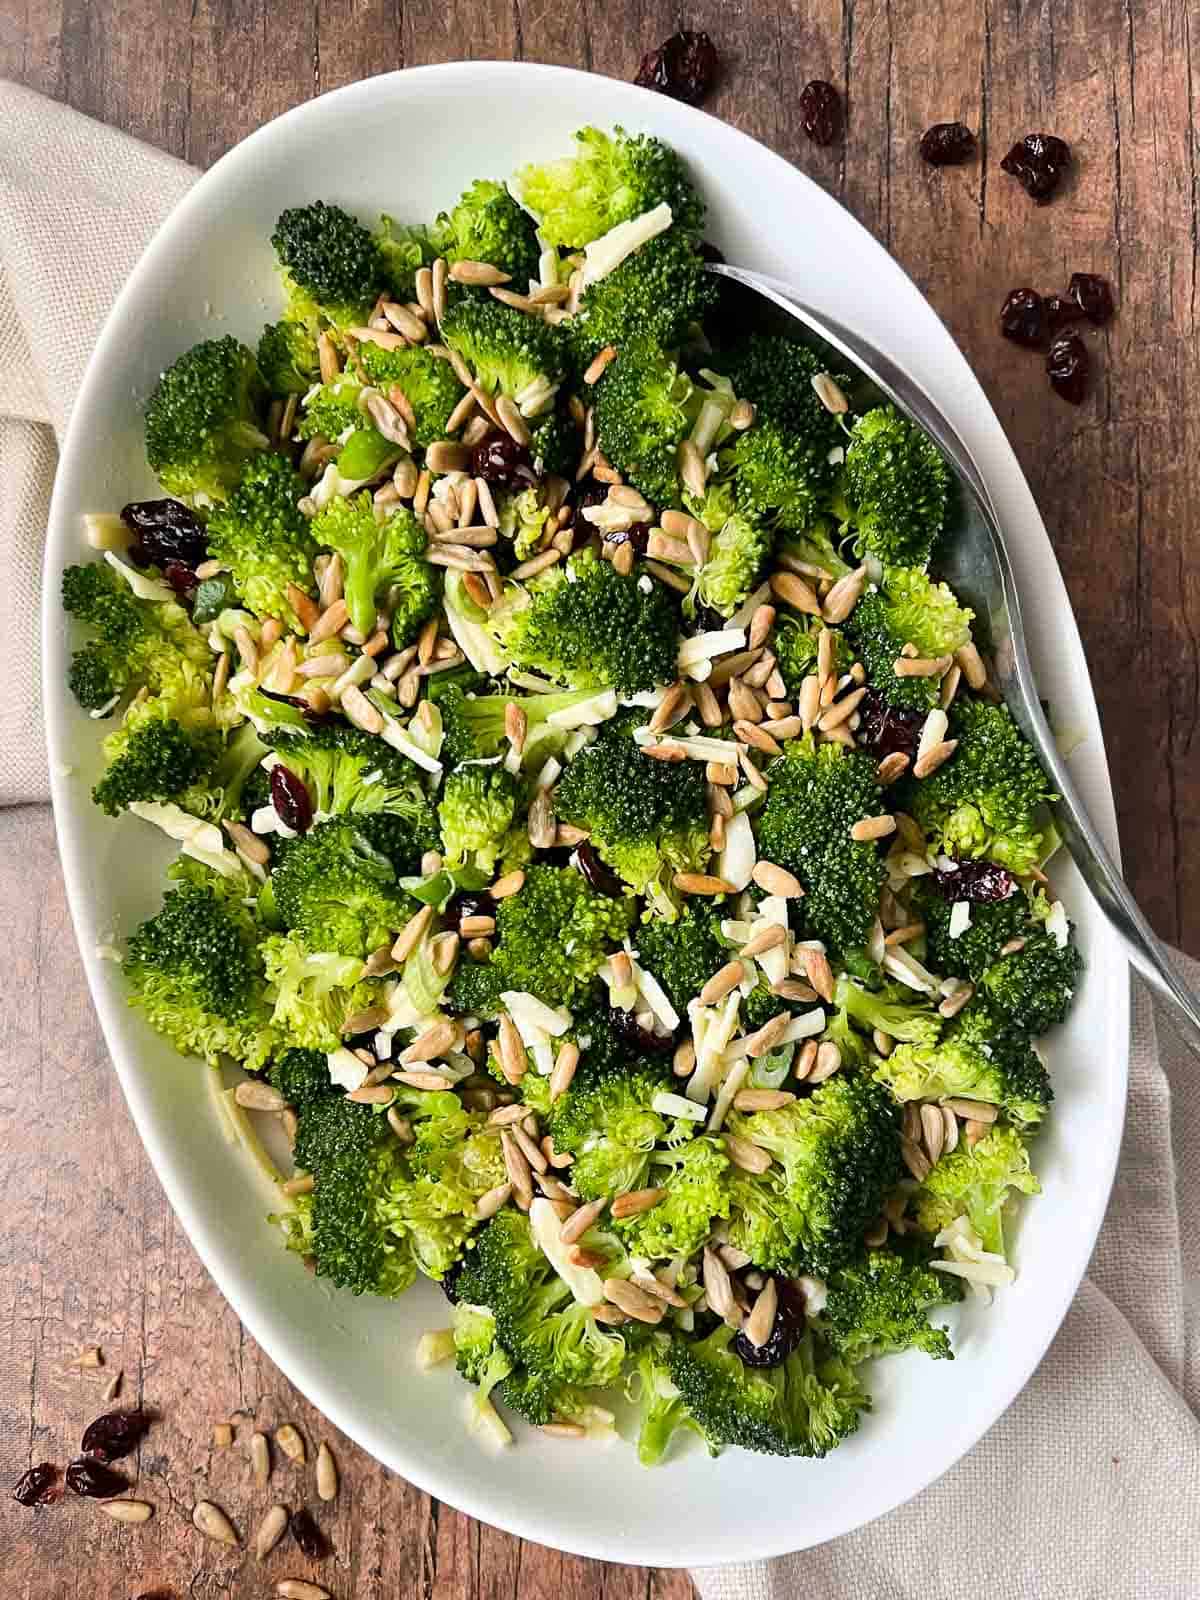 Overhead view of an oval bowl filled with broccoli salad with honey-mustard dressing and sprinkled with toasted sunflower seeds and dried cranberries.